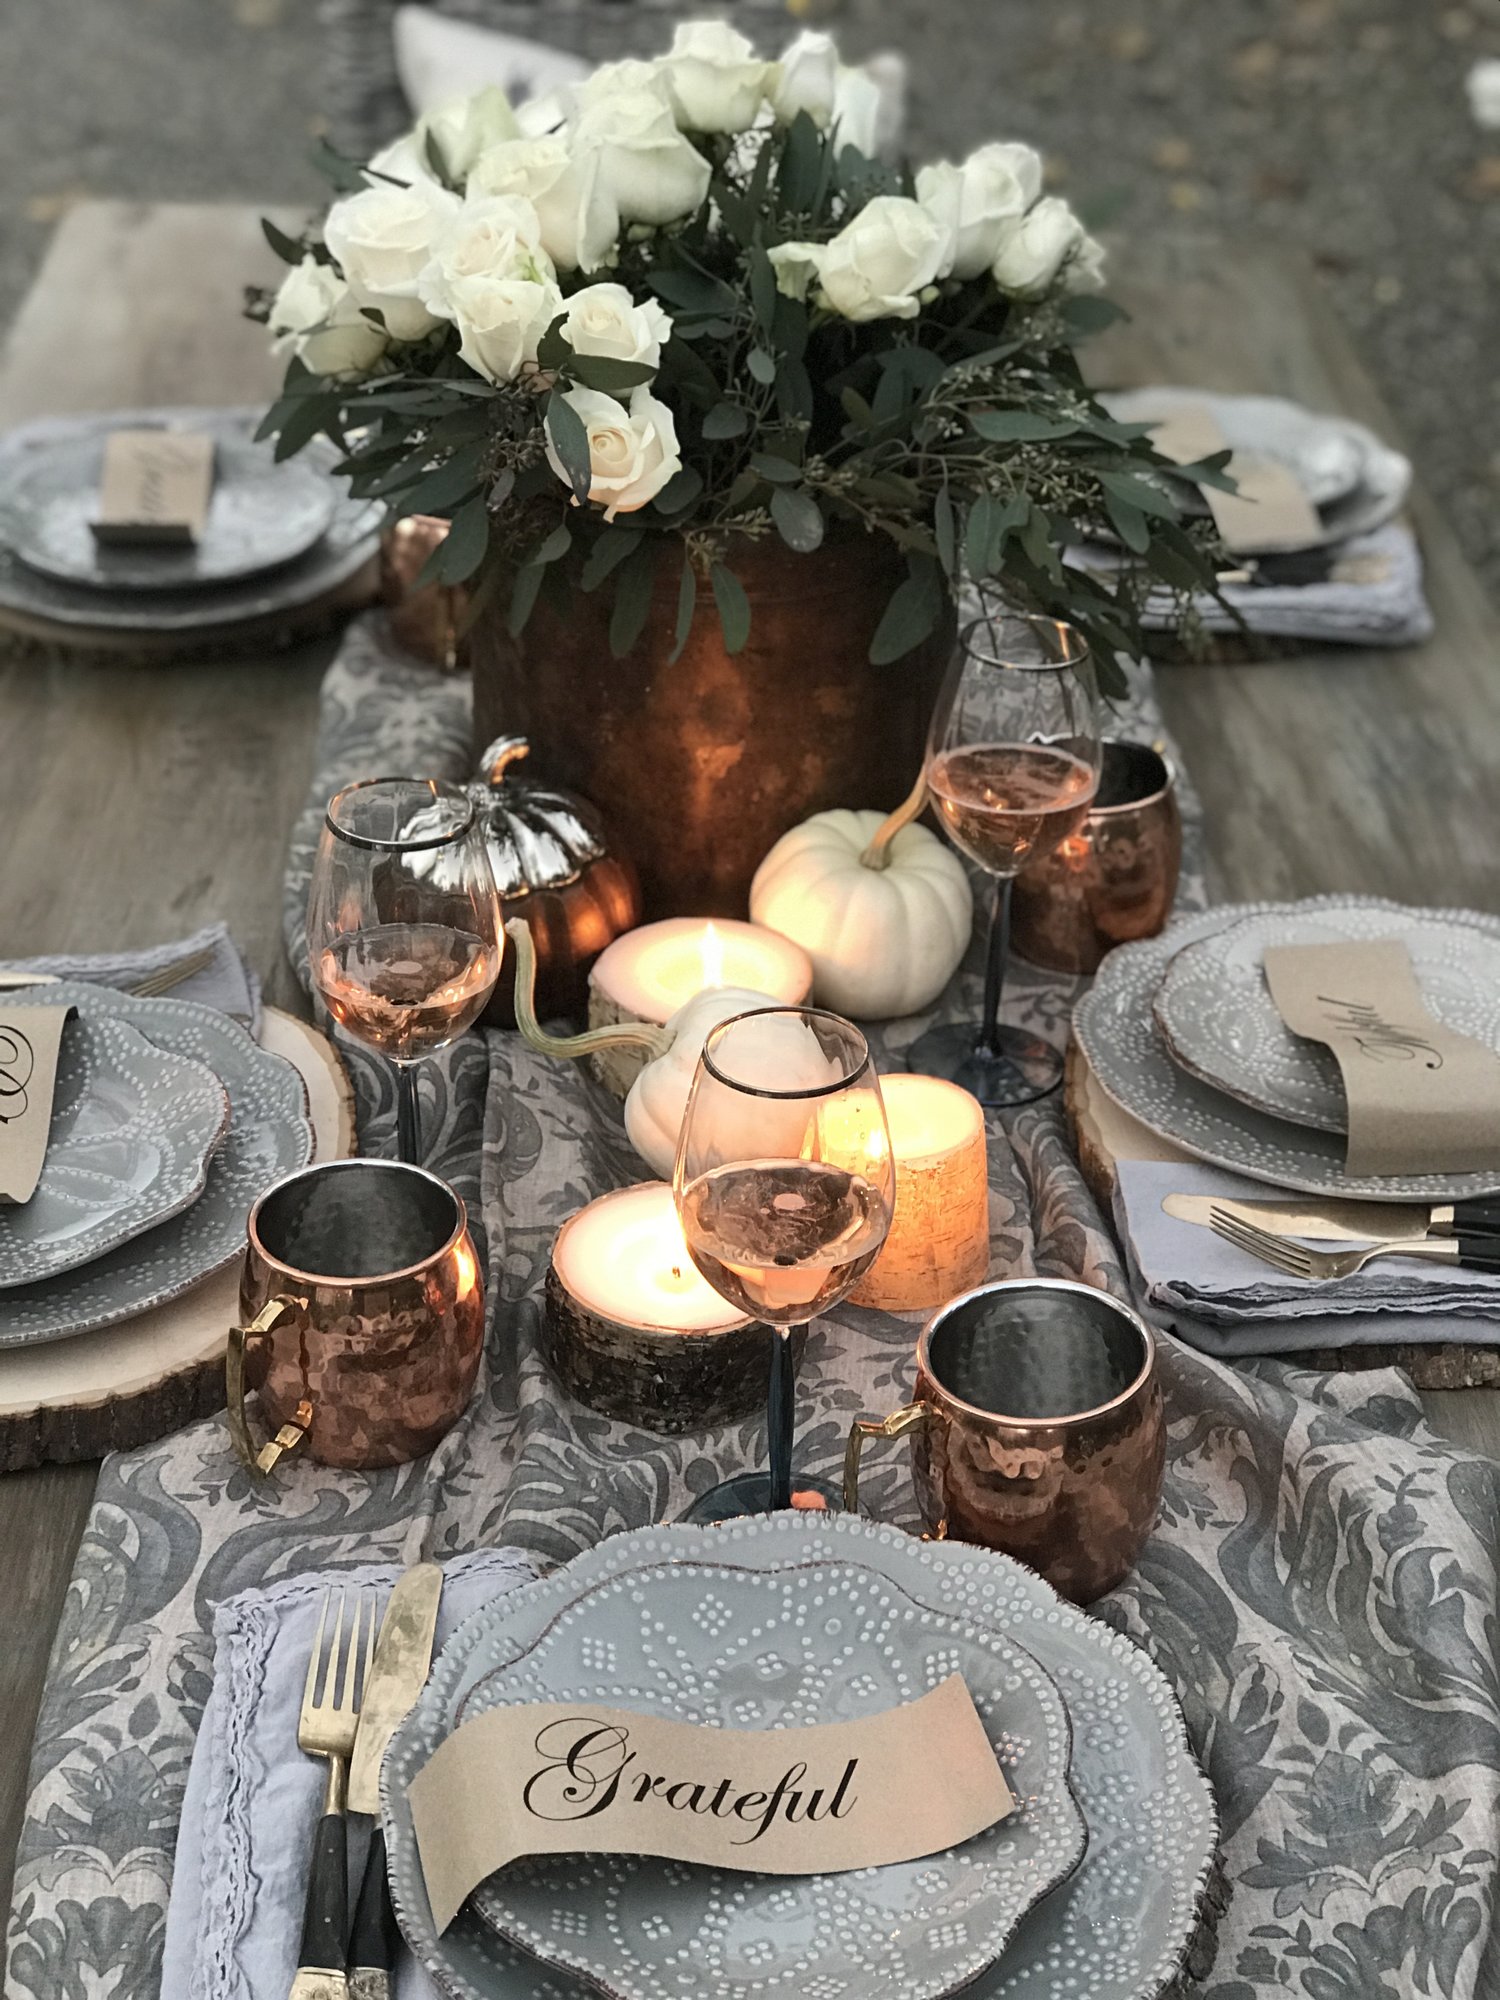 Hosting an Autumn Dinner Party- Outdoors